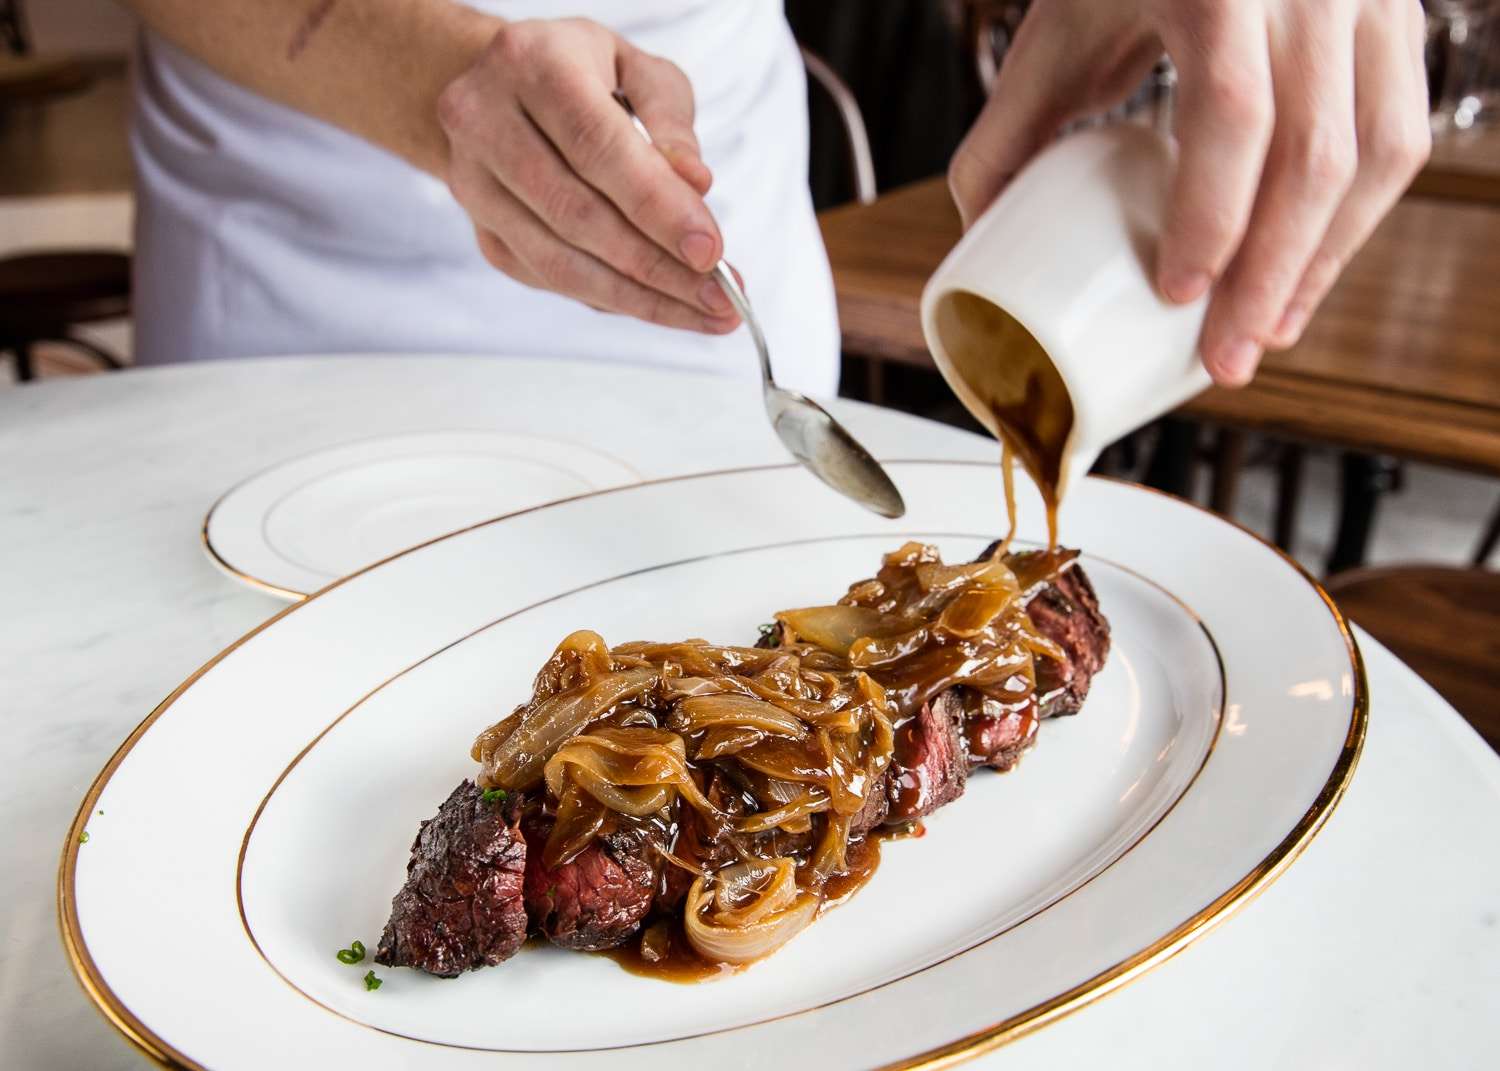 This skirt steak is being smothered in an onion sauce and served tableside at an NYC Restaurant.